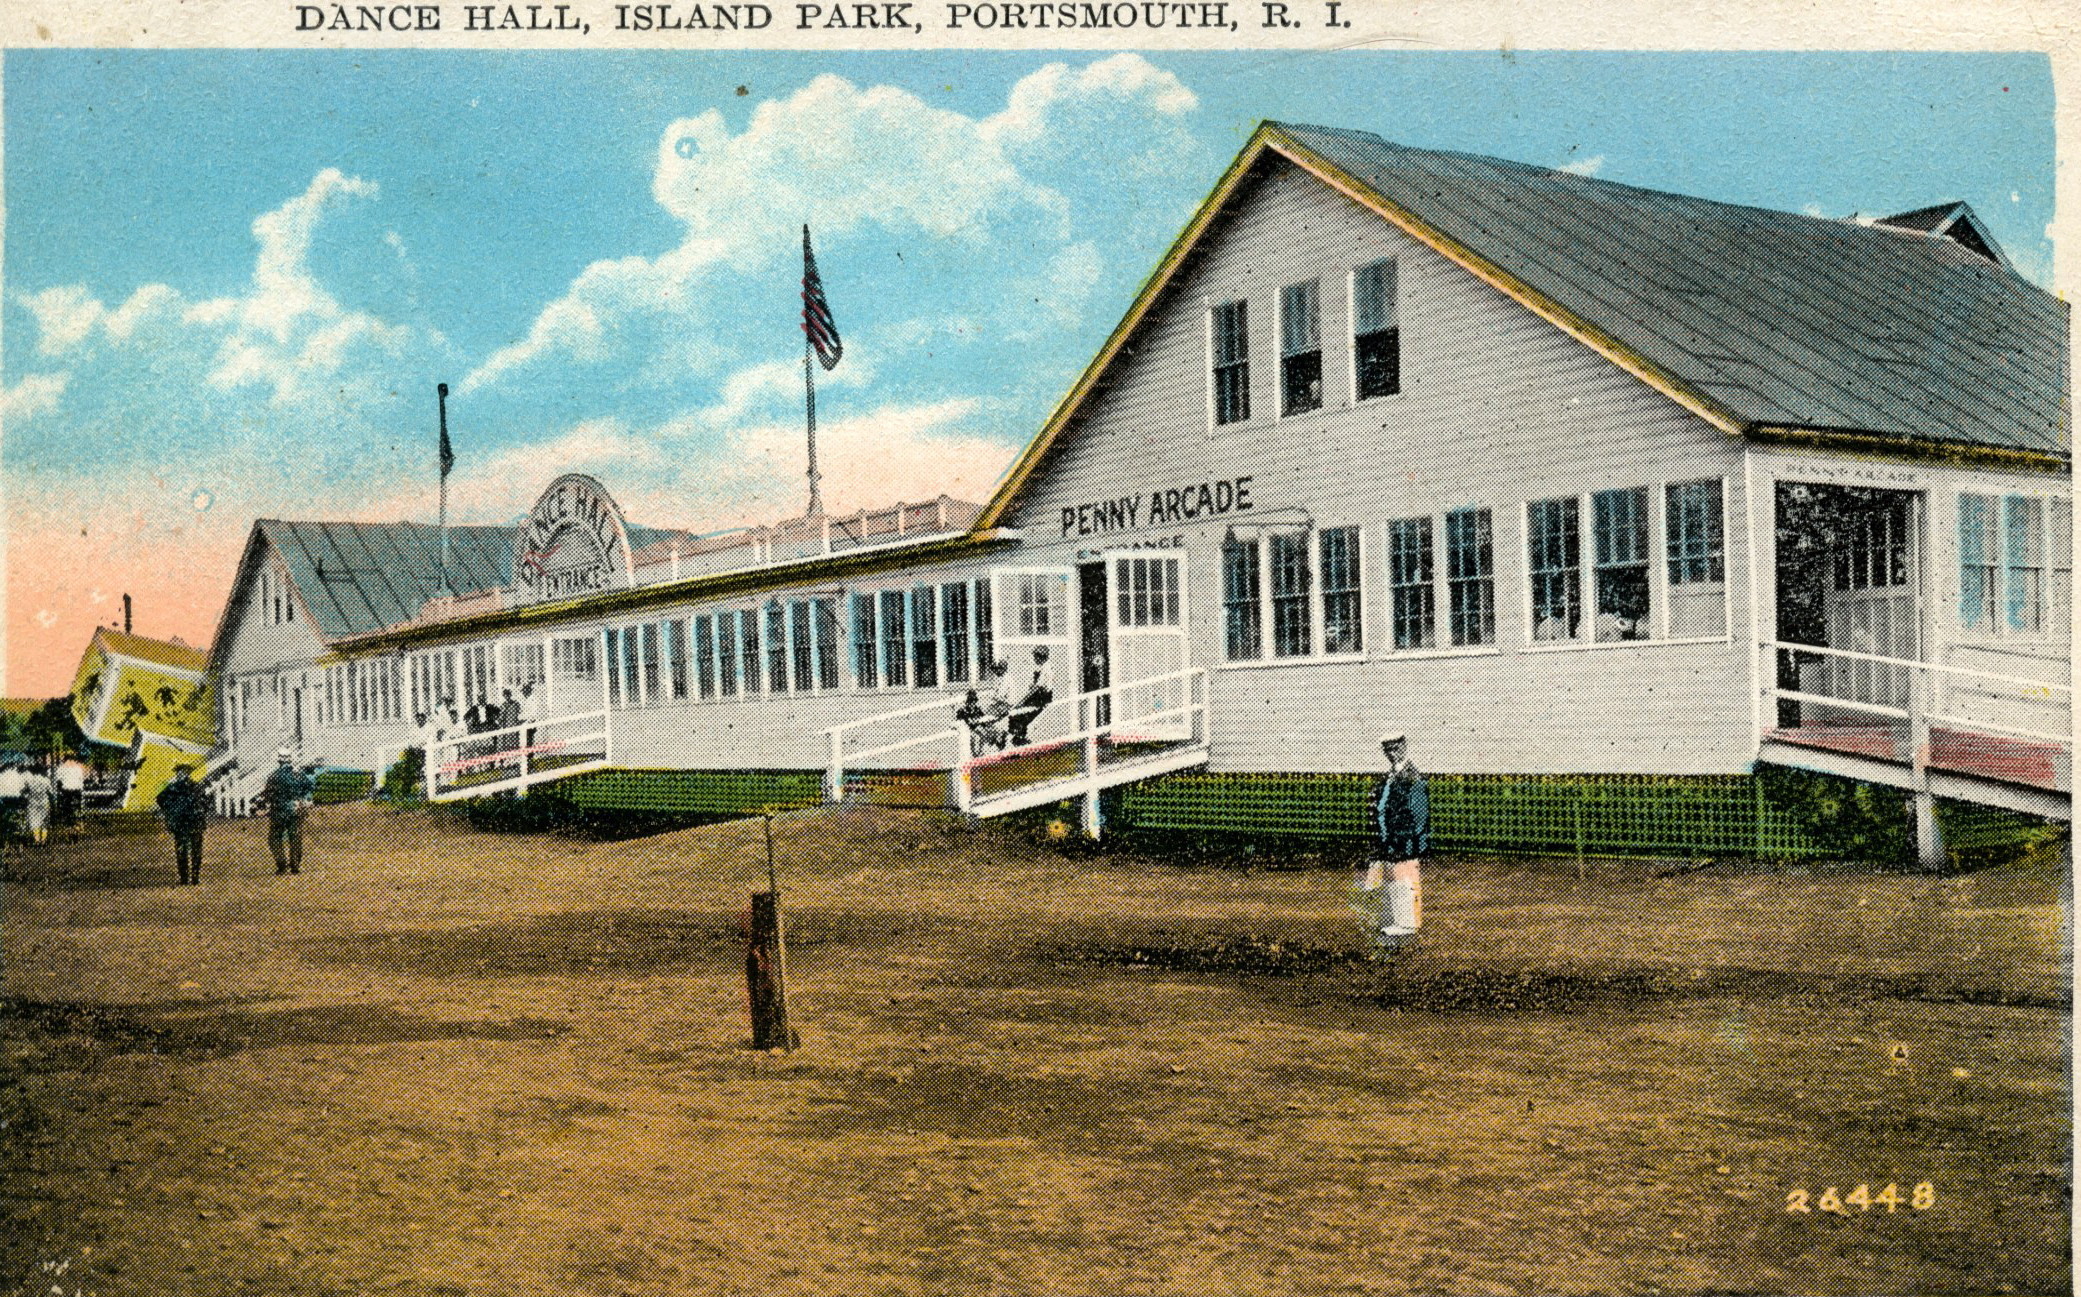 This colorized postcard of the Island Park amusement park’s dance hall is from Jim Garman’s collection.